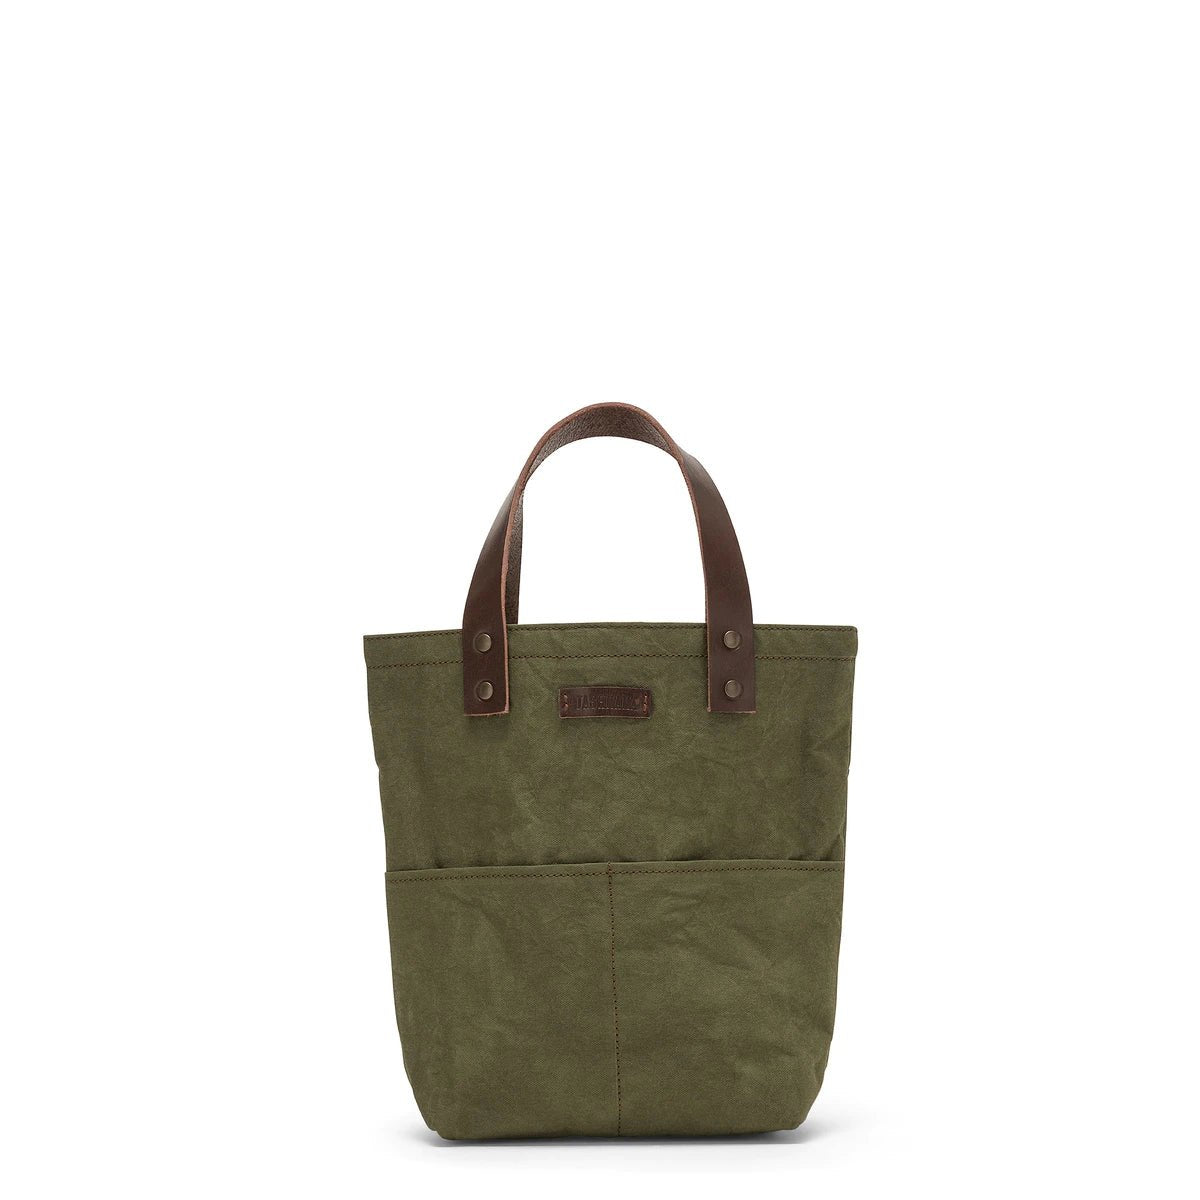 A dark green washable paper tote bag with two brown leather handles and external pockets